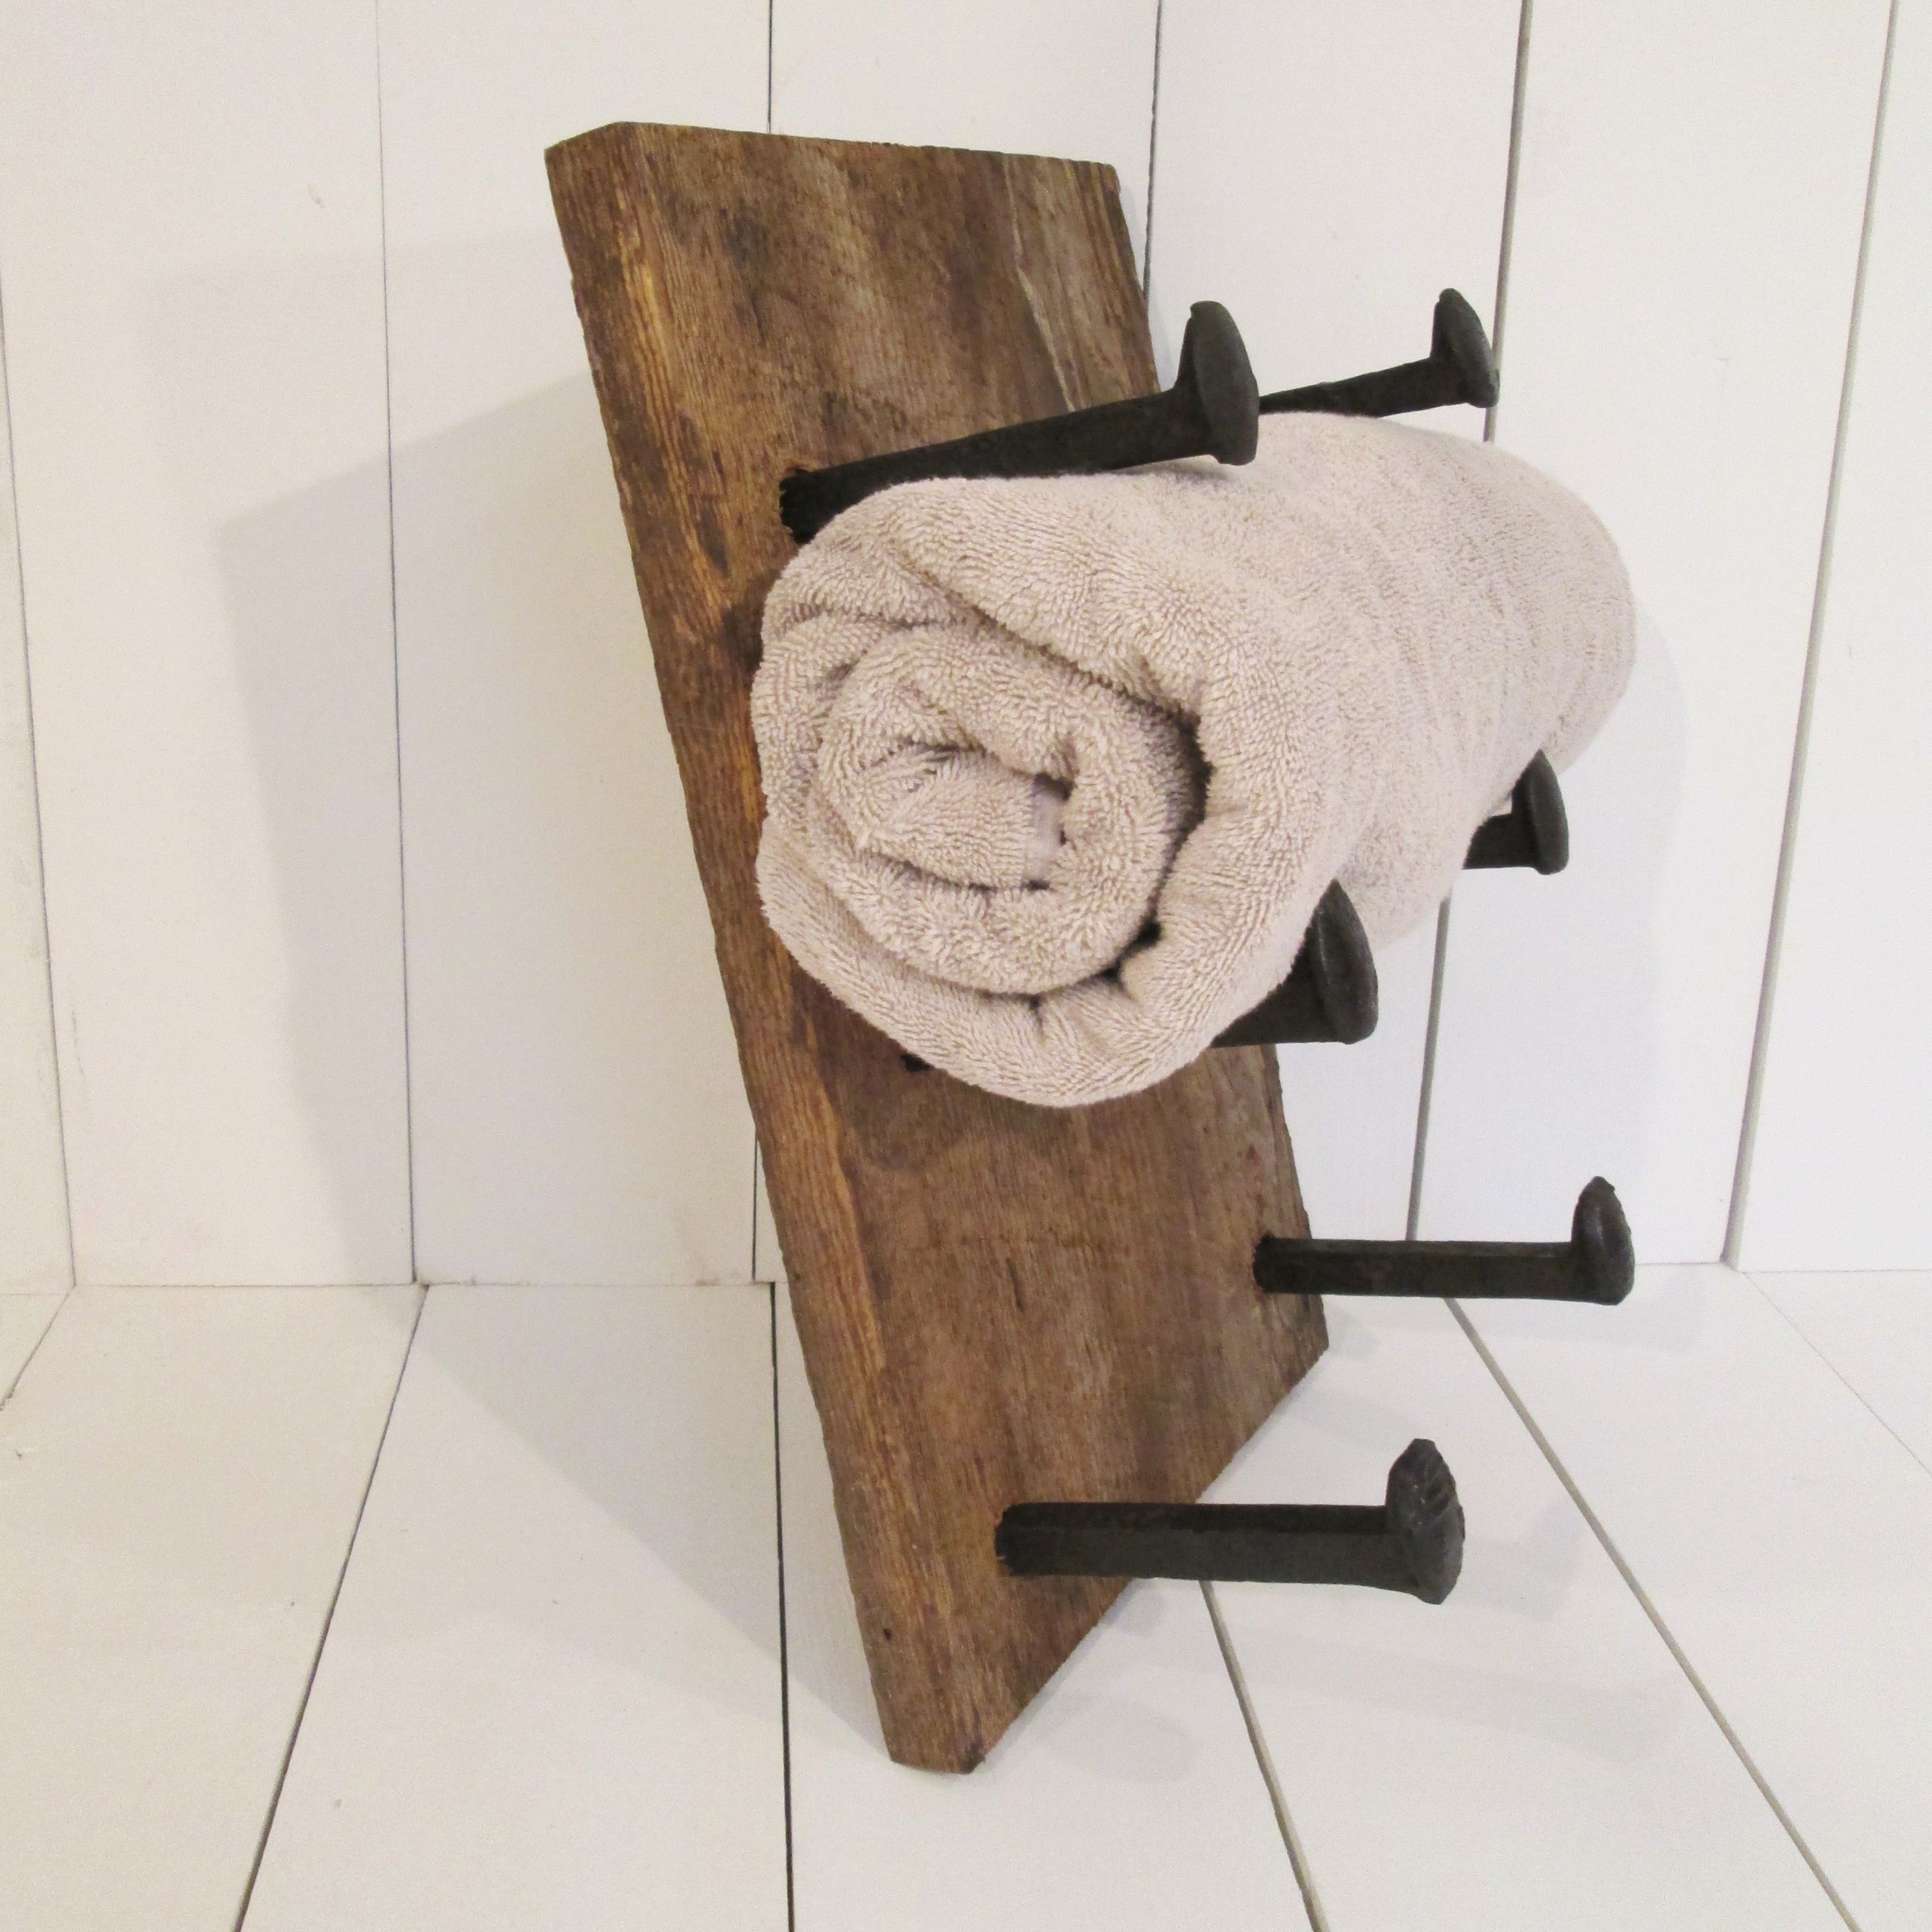 Hand Towel Holder, Rustic Towel Rack With Industrial Railroad Spike Accents  